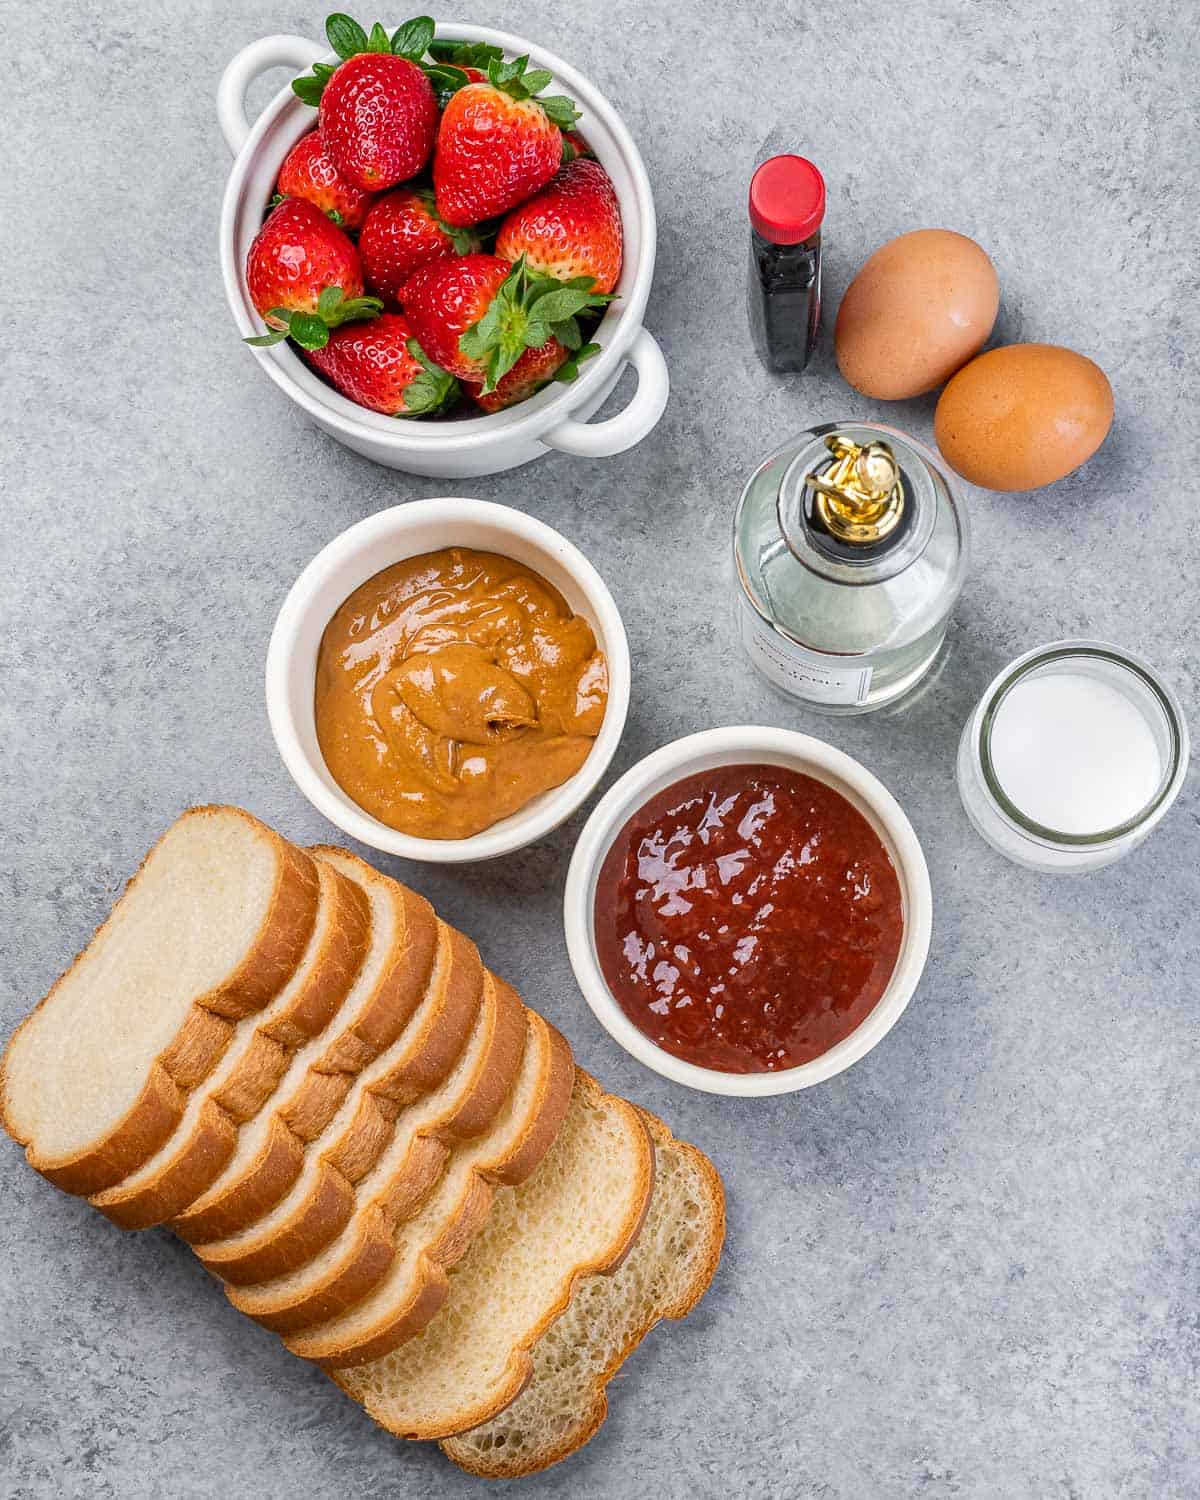 Slices of bread, bowls of peanut butter, jelly and strawberries near two eggs, milk and vanilla.